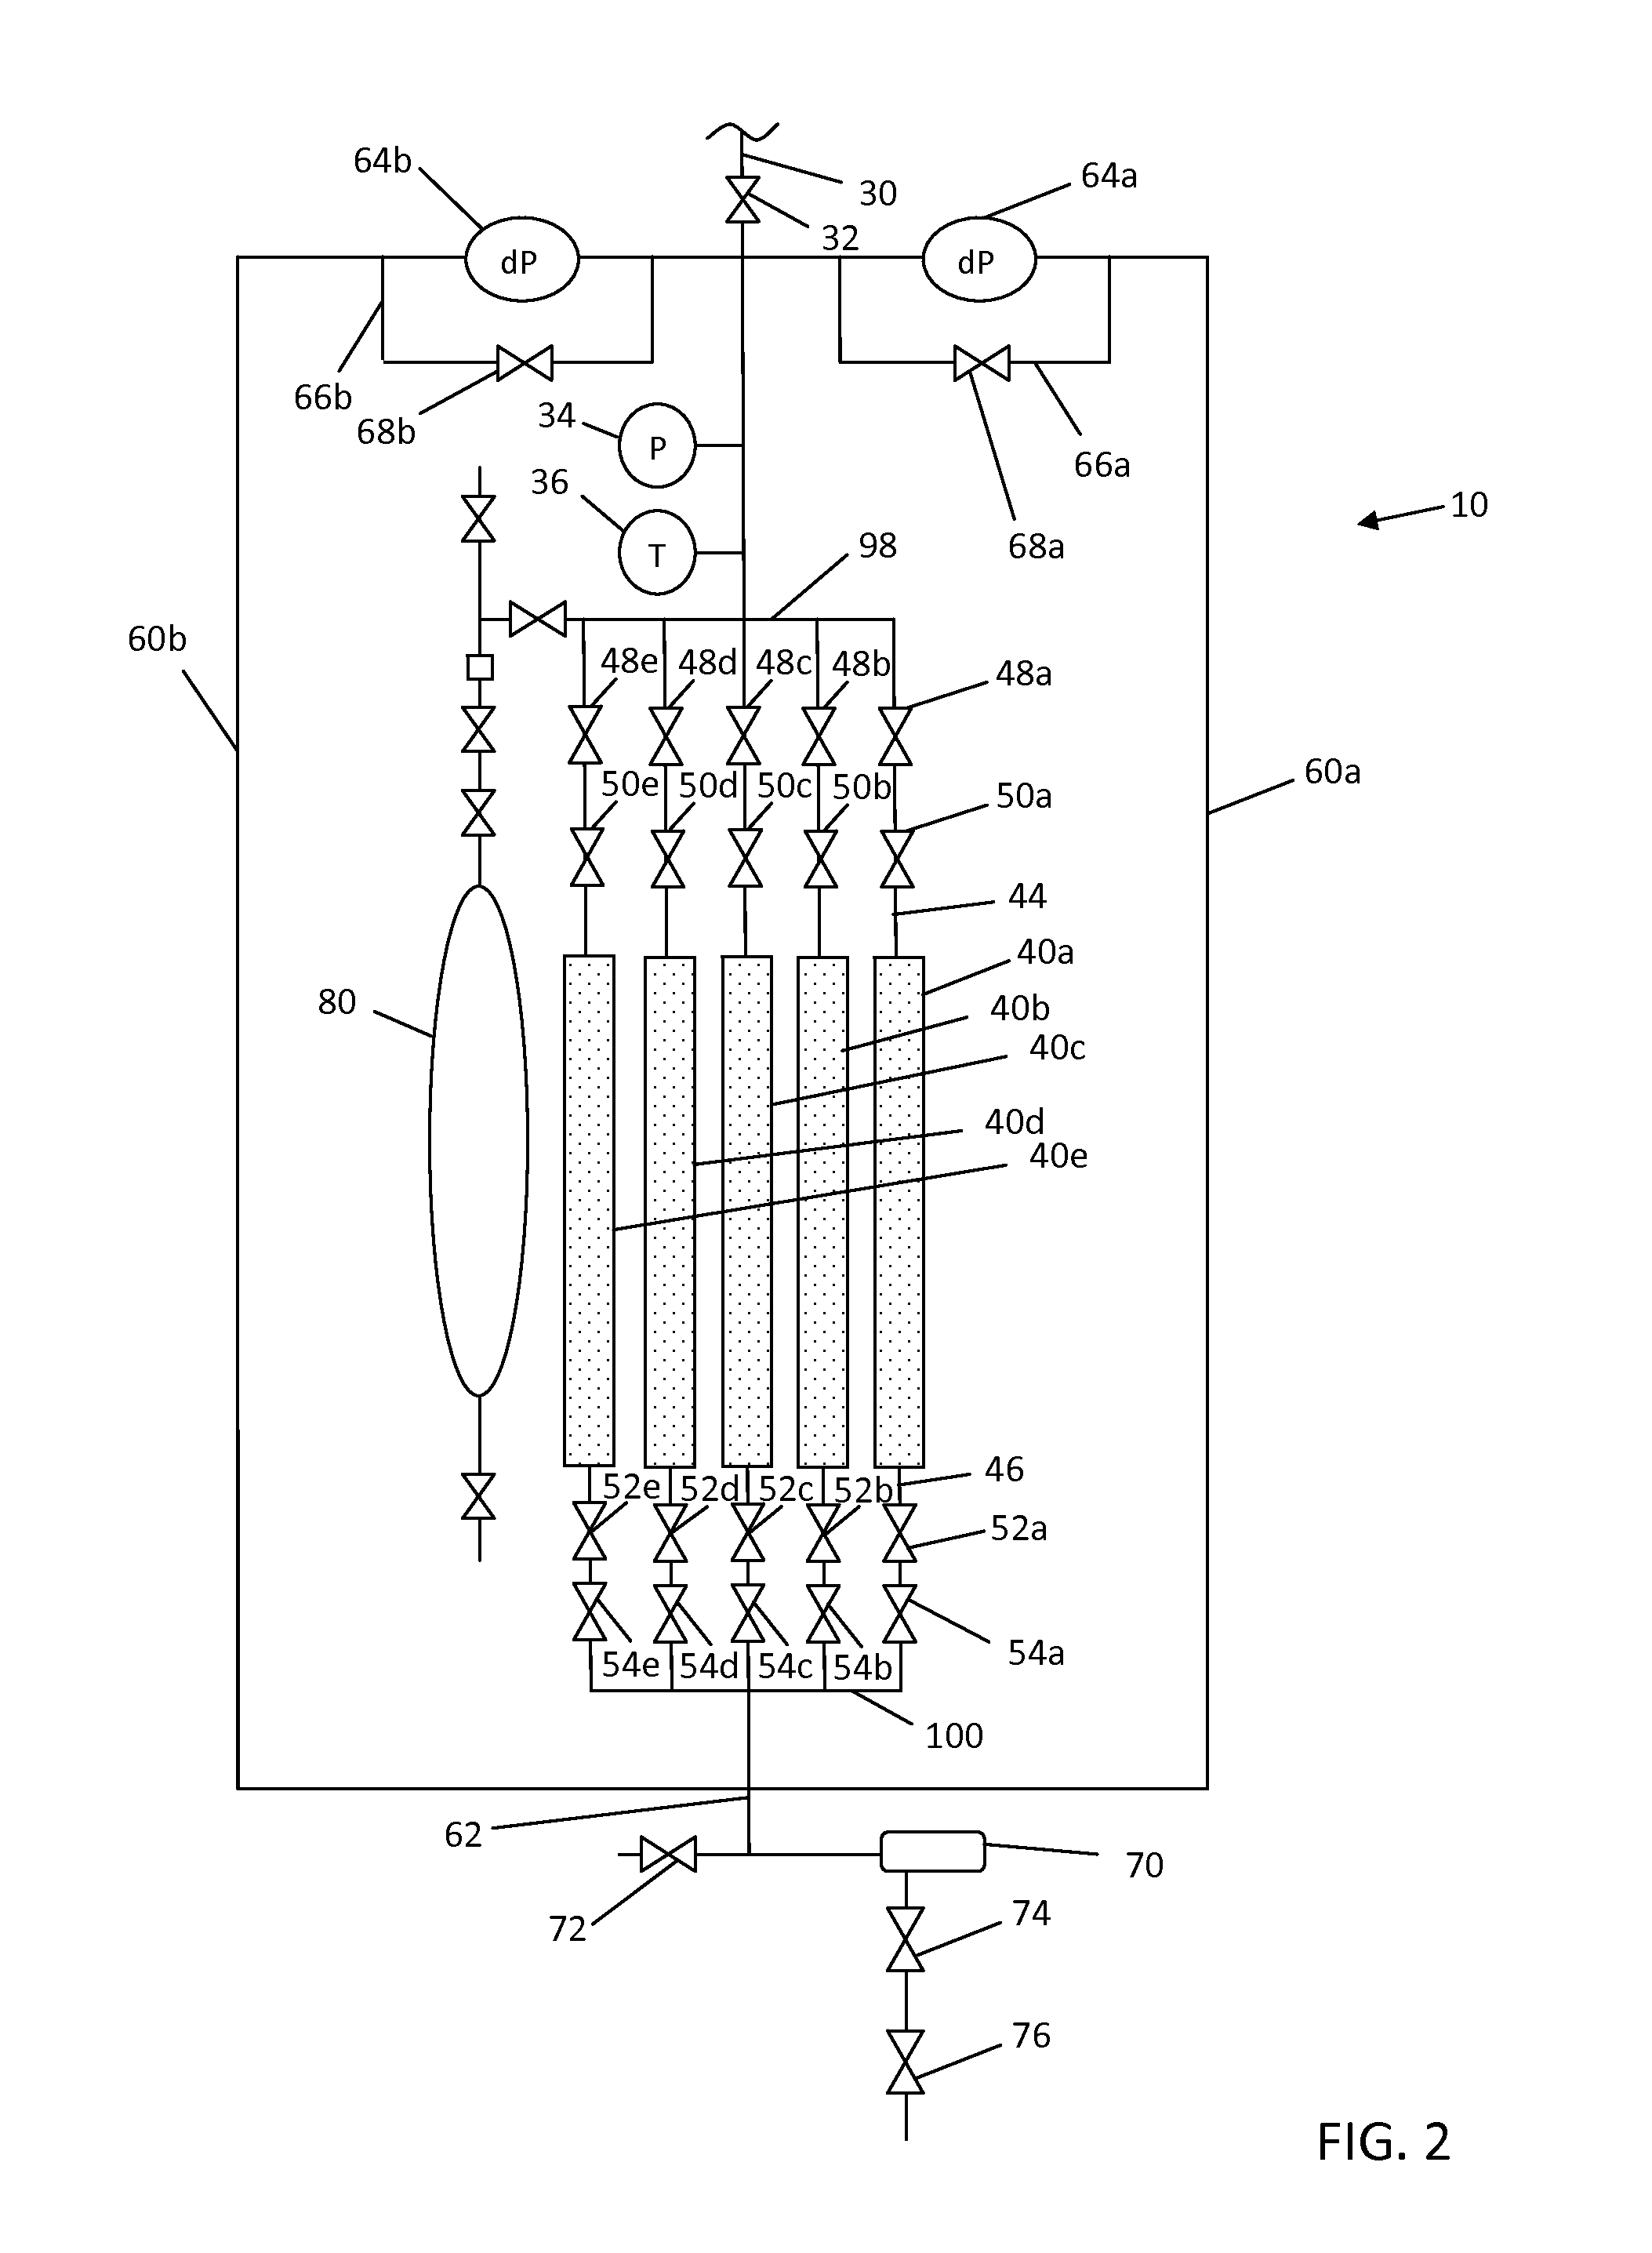 Apparatus and Method For Measuring Viscosity of a Fluid